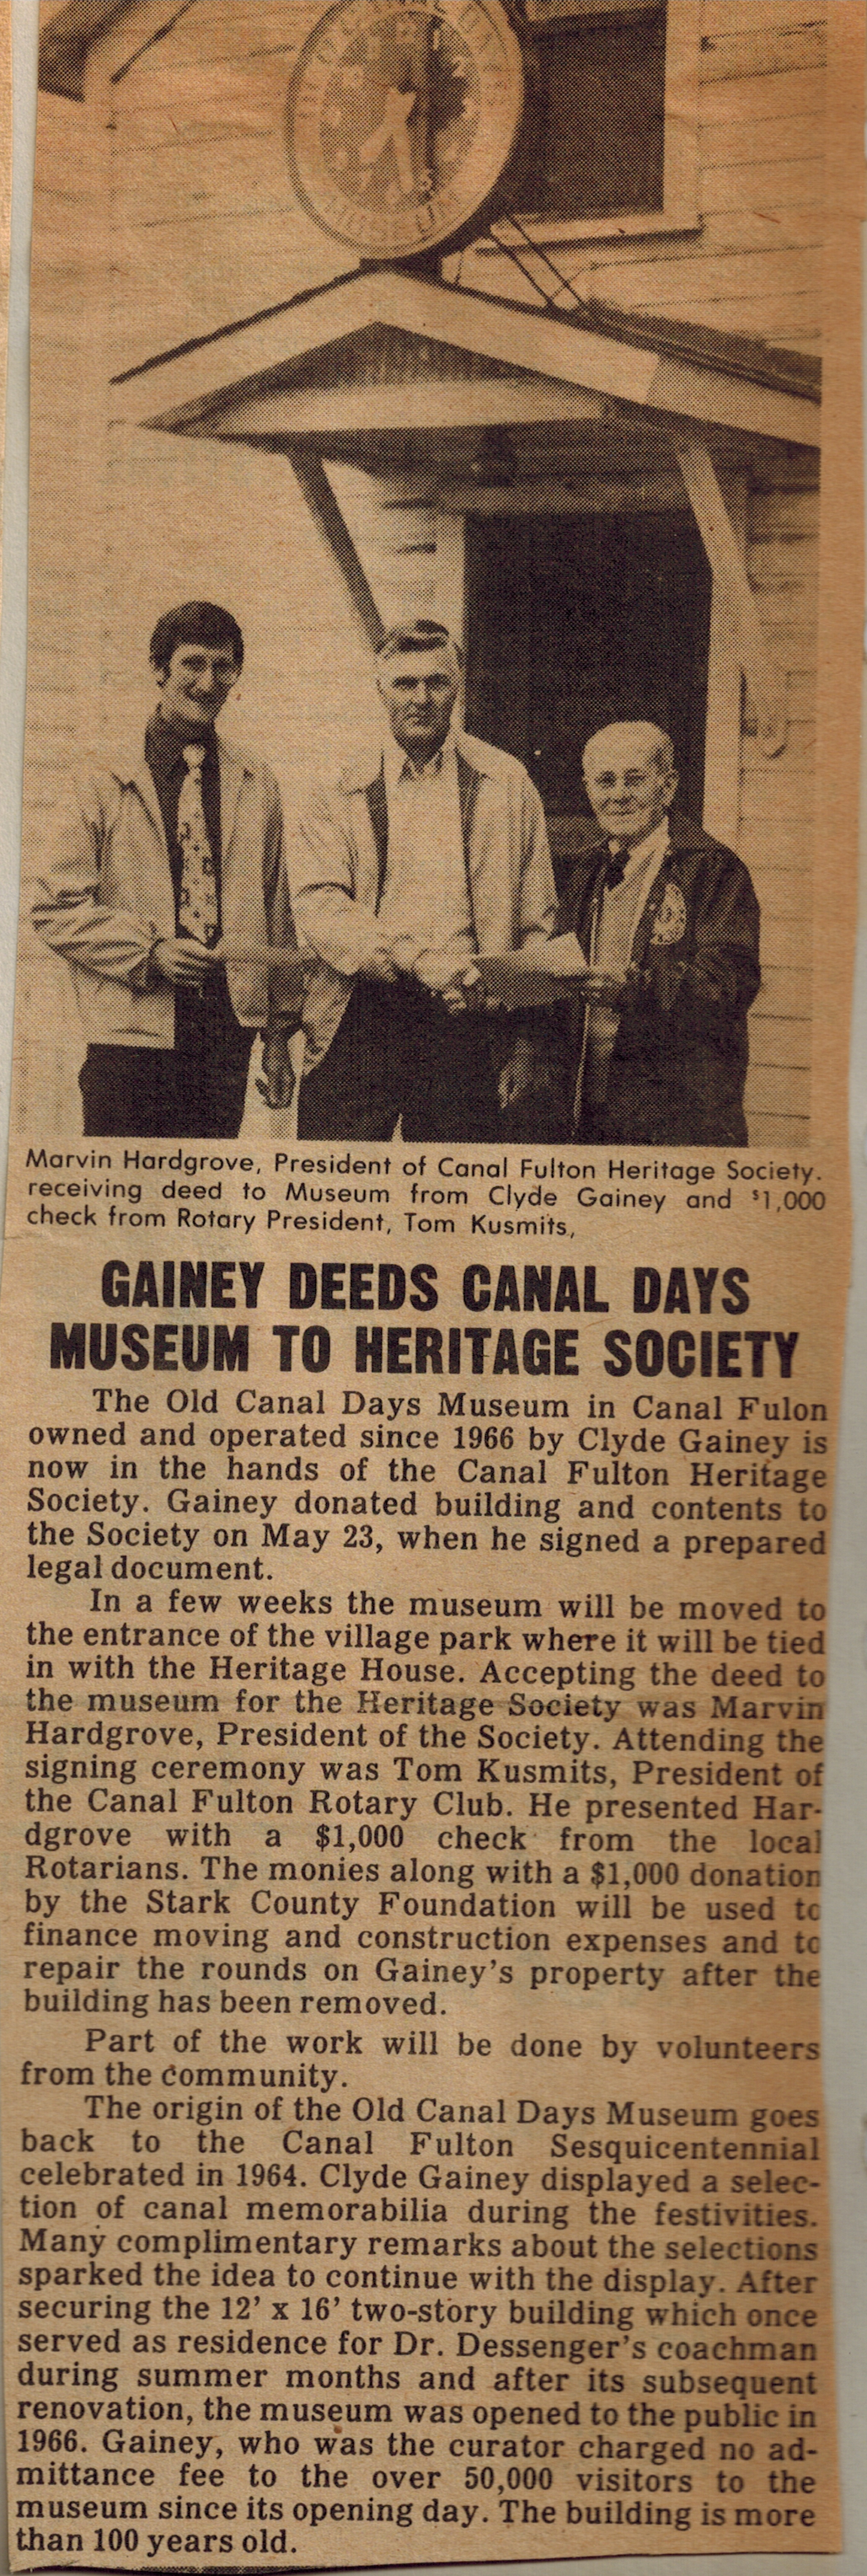 Gainey deeds Museum to CFHS